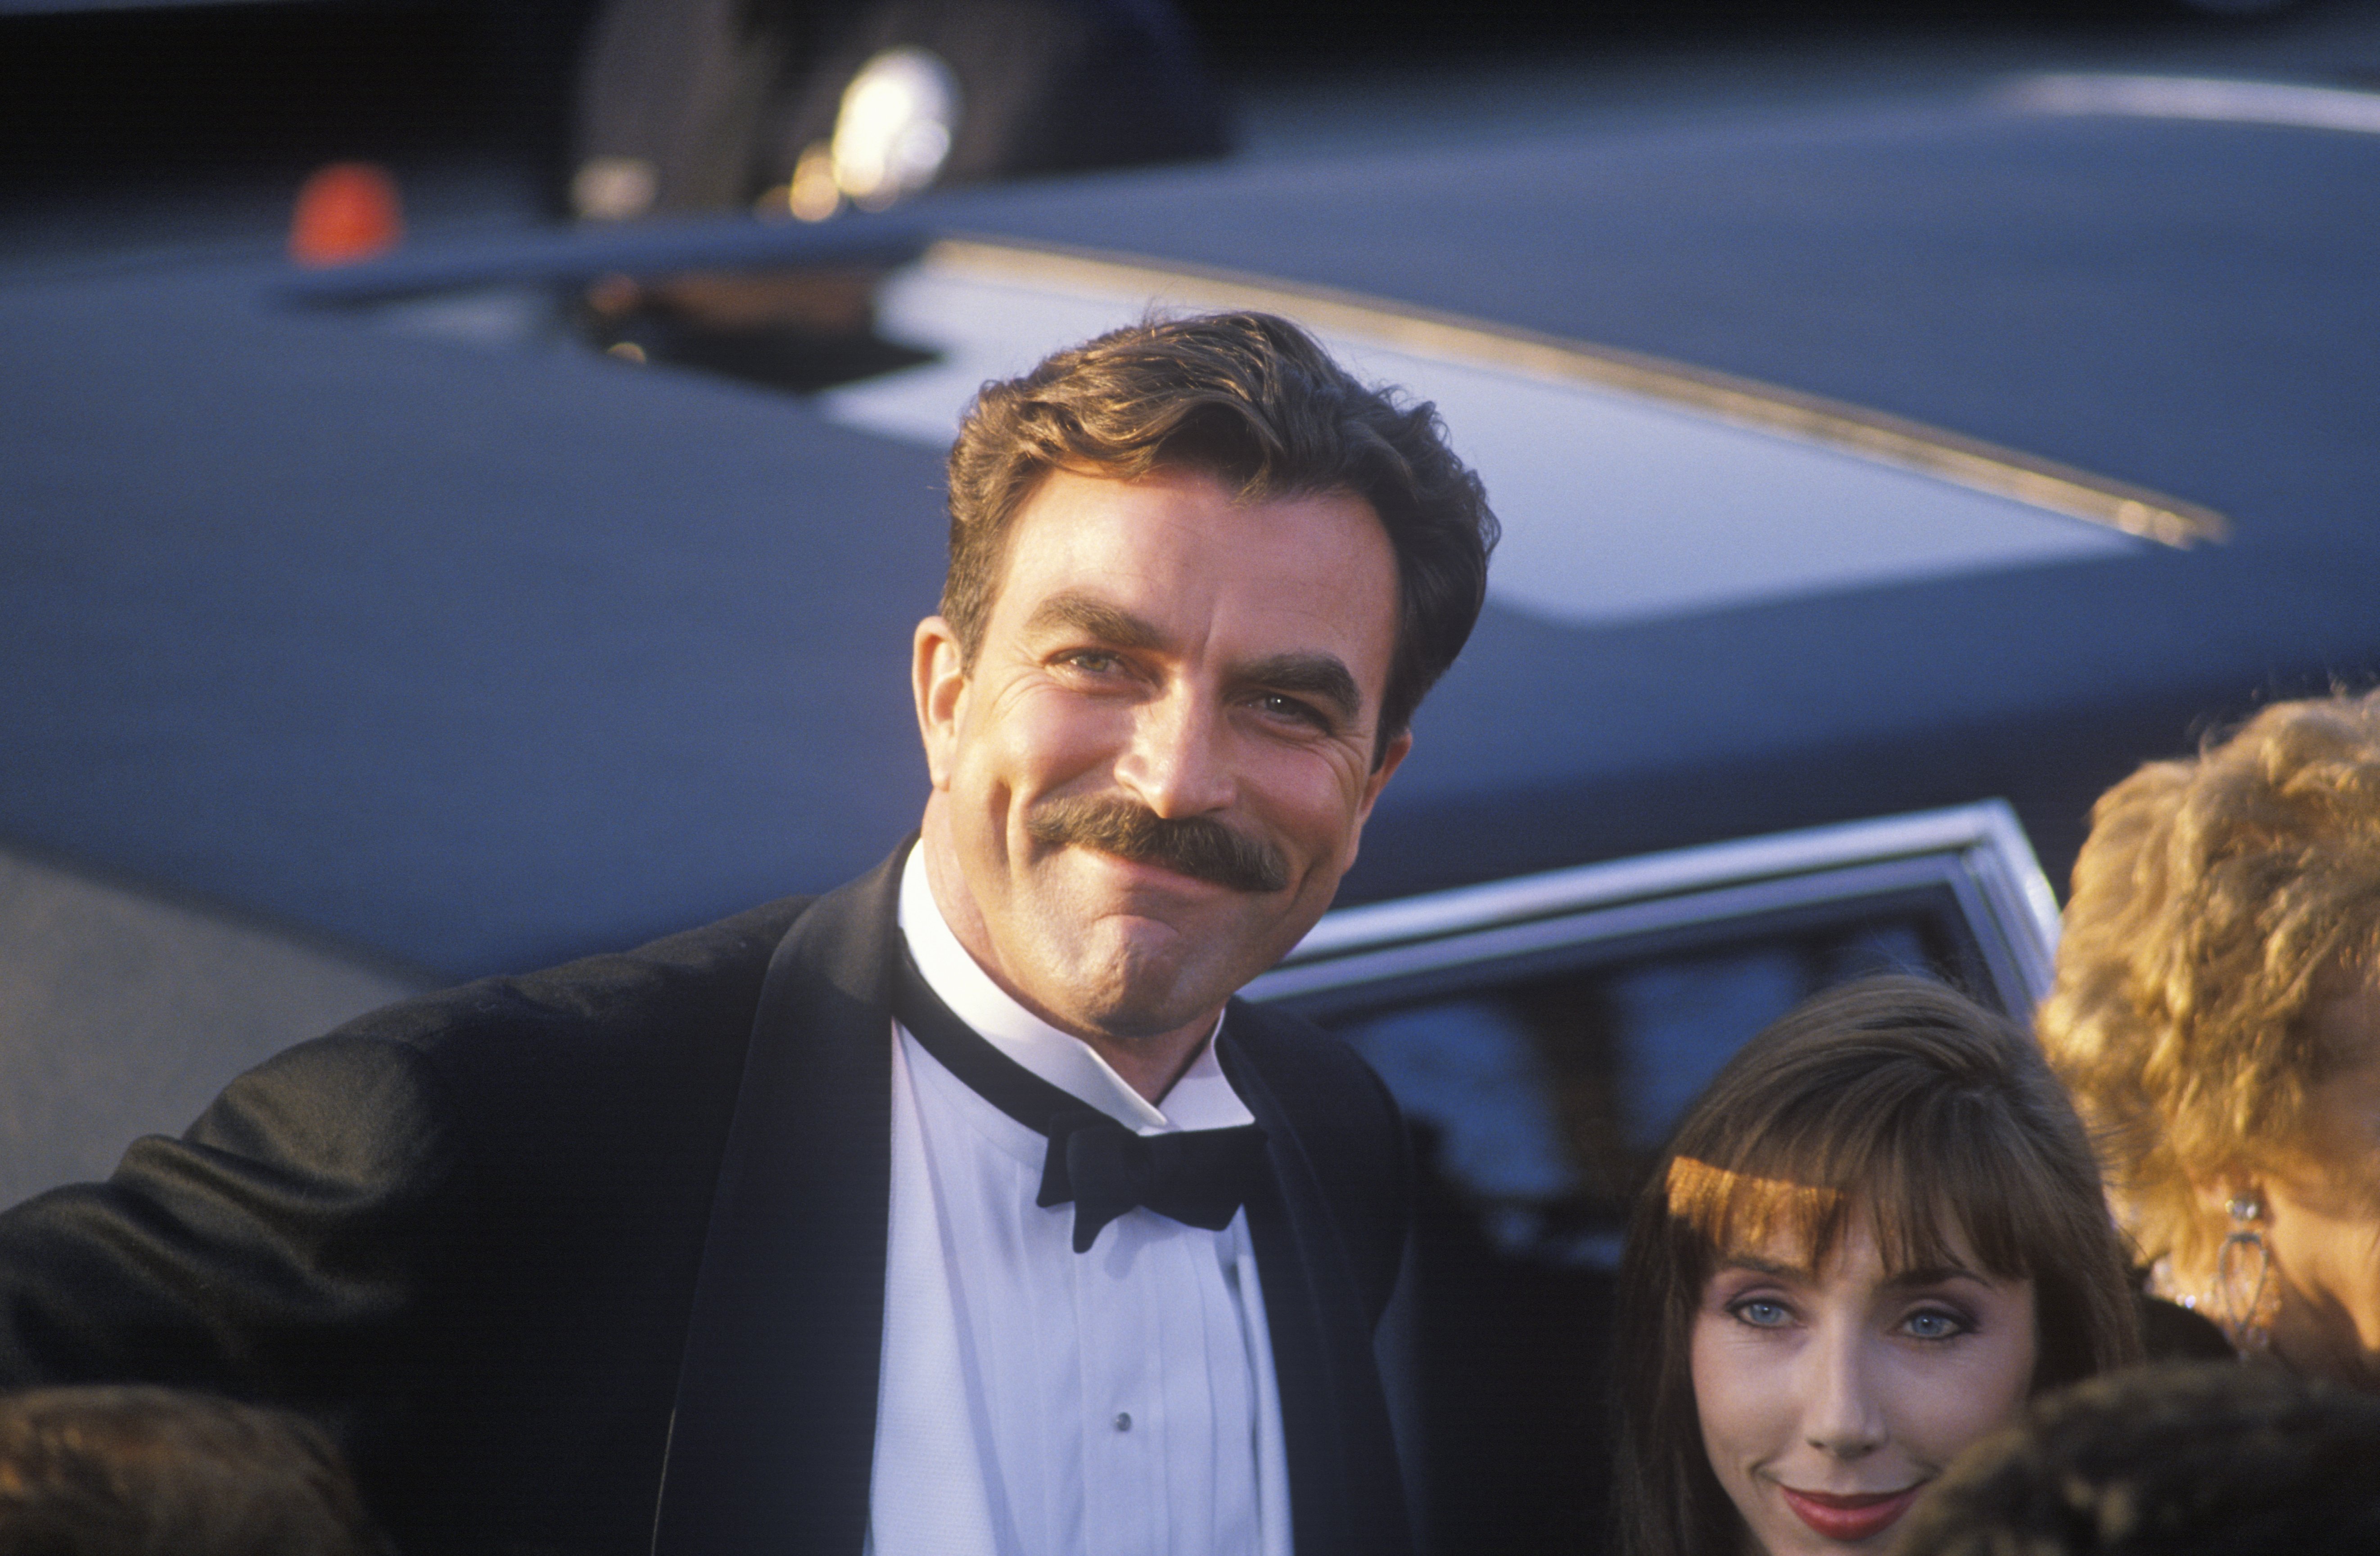 Tom Selleck at the 62nd Annual Academy Awards, Los Angeles, California, March 26, 1990. | Photo: GettyImages